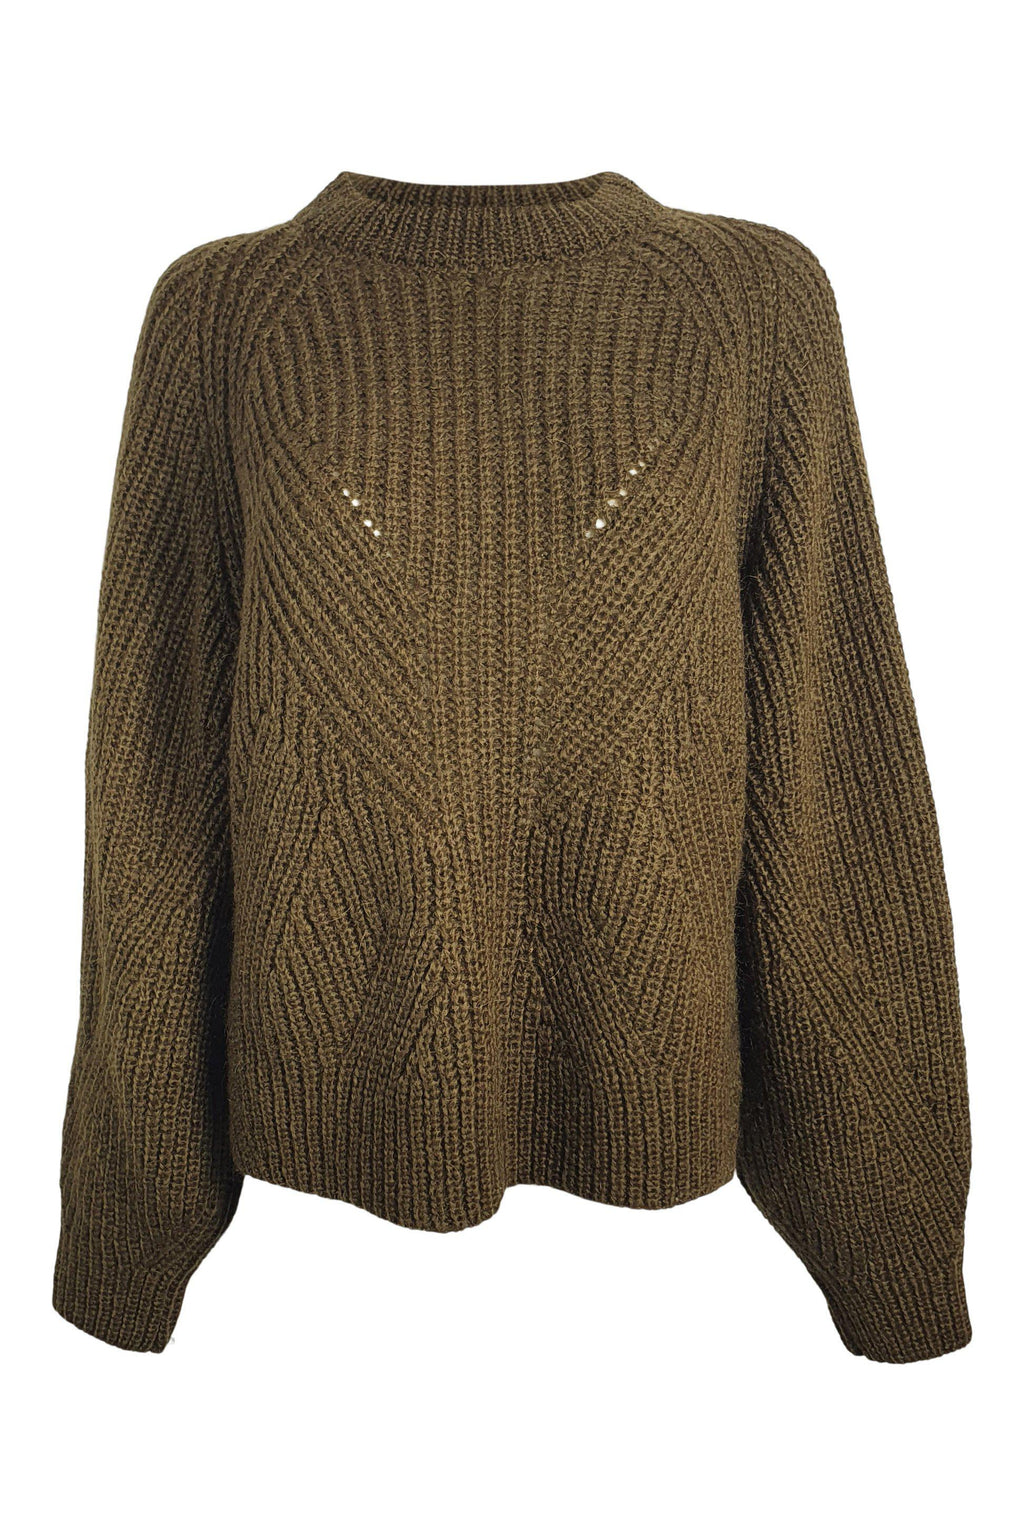 THE KOOPLES Green Mix Cable Knit Long Sleeve Jumper (2 | UK 12 | EU 38)-The Freperie